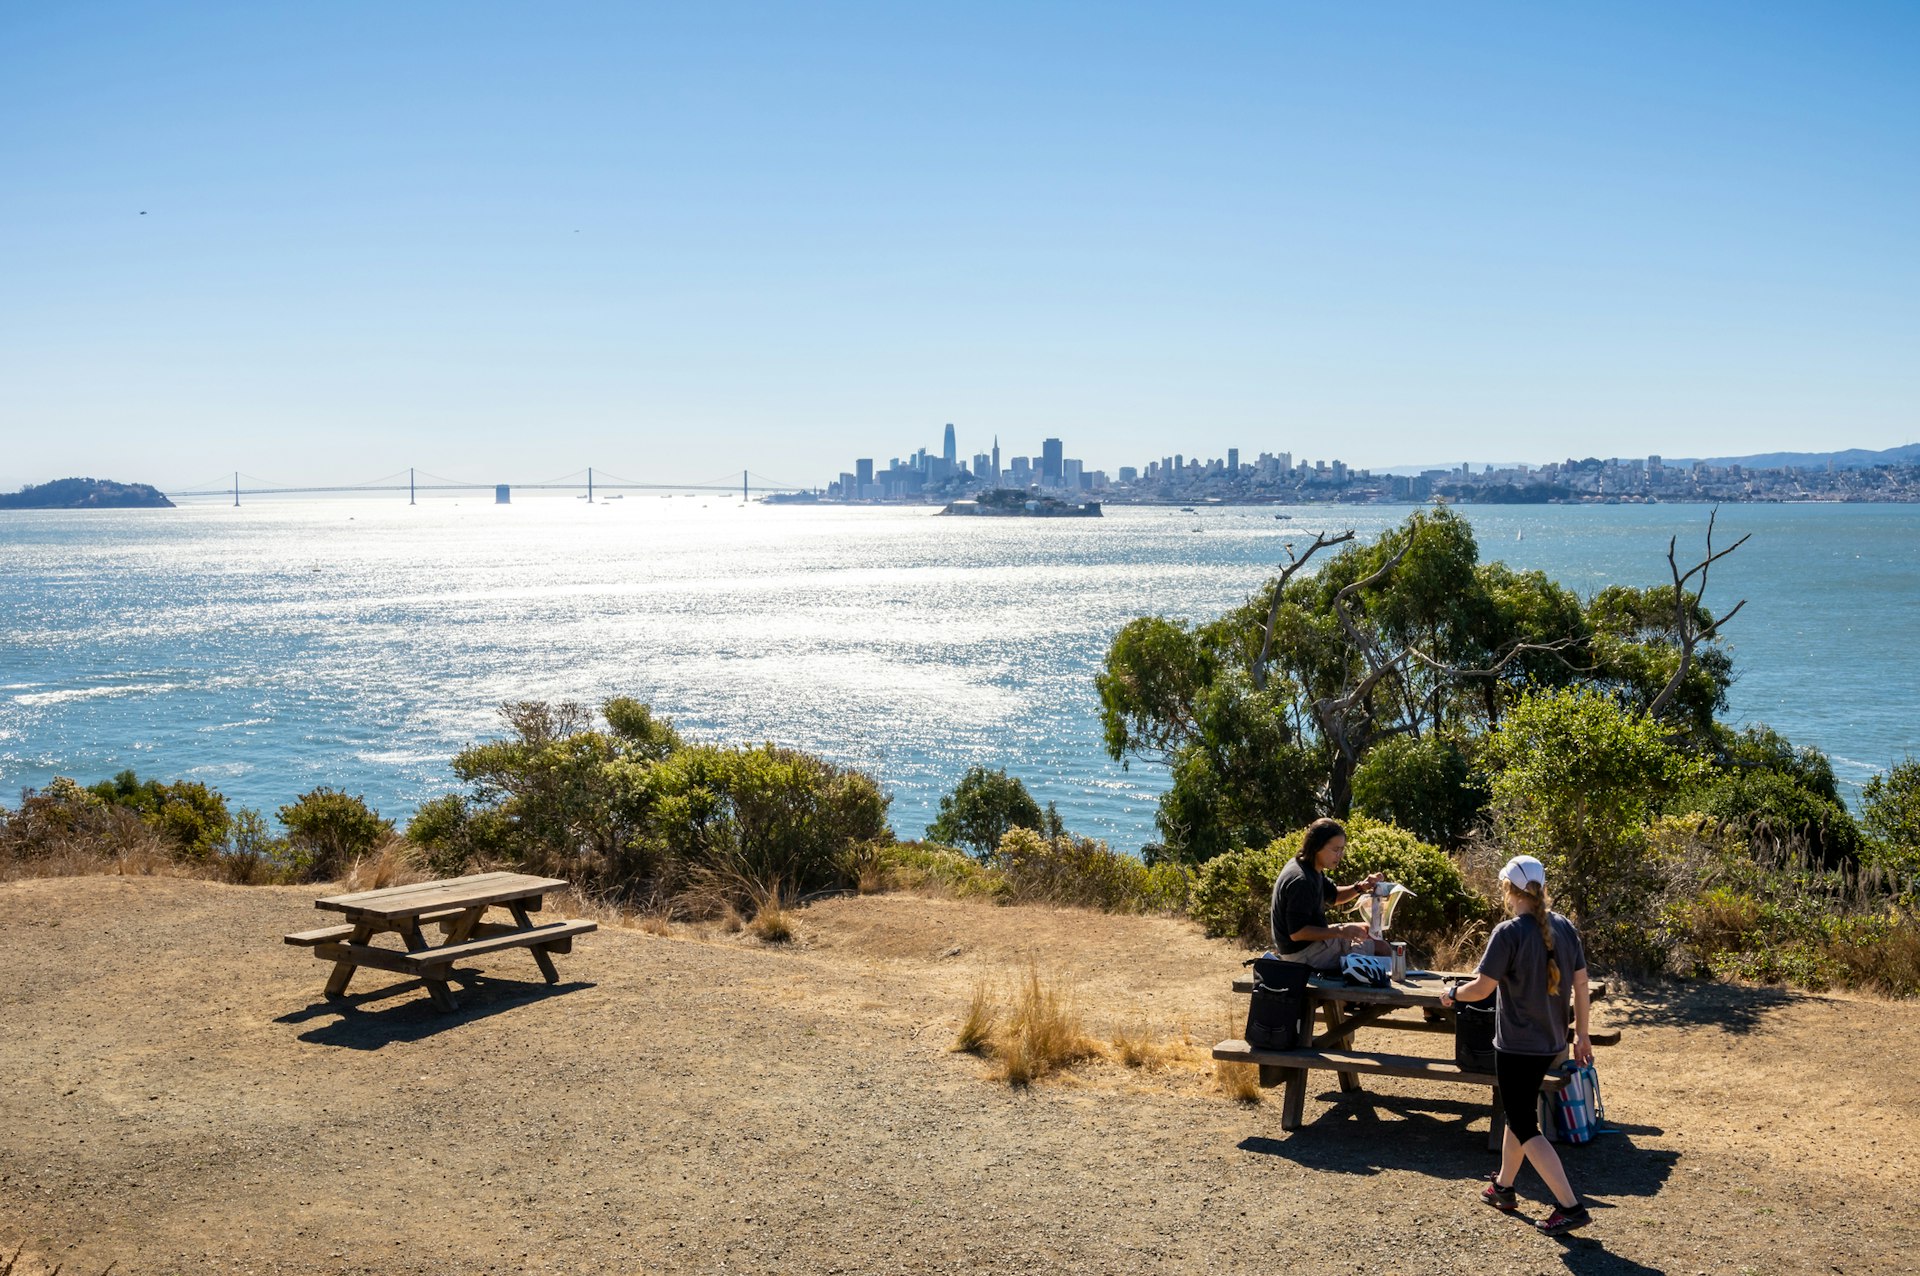 Tourists enjoying a picnic in Angel Island with the view of Alcatraz Island and San Francisco